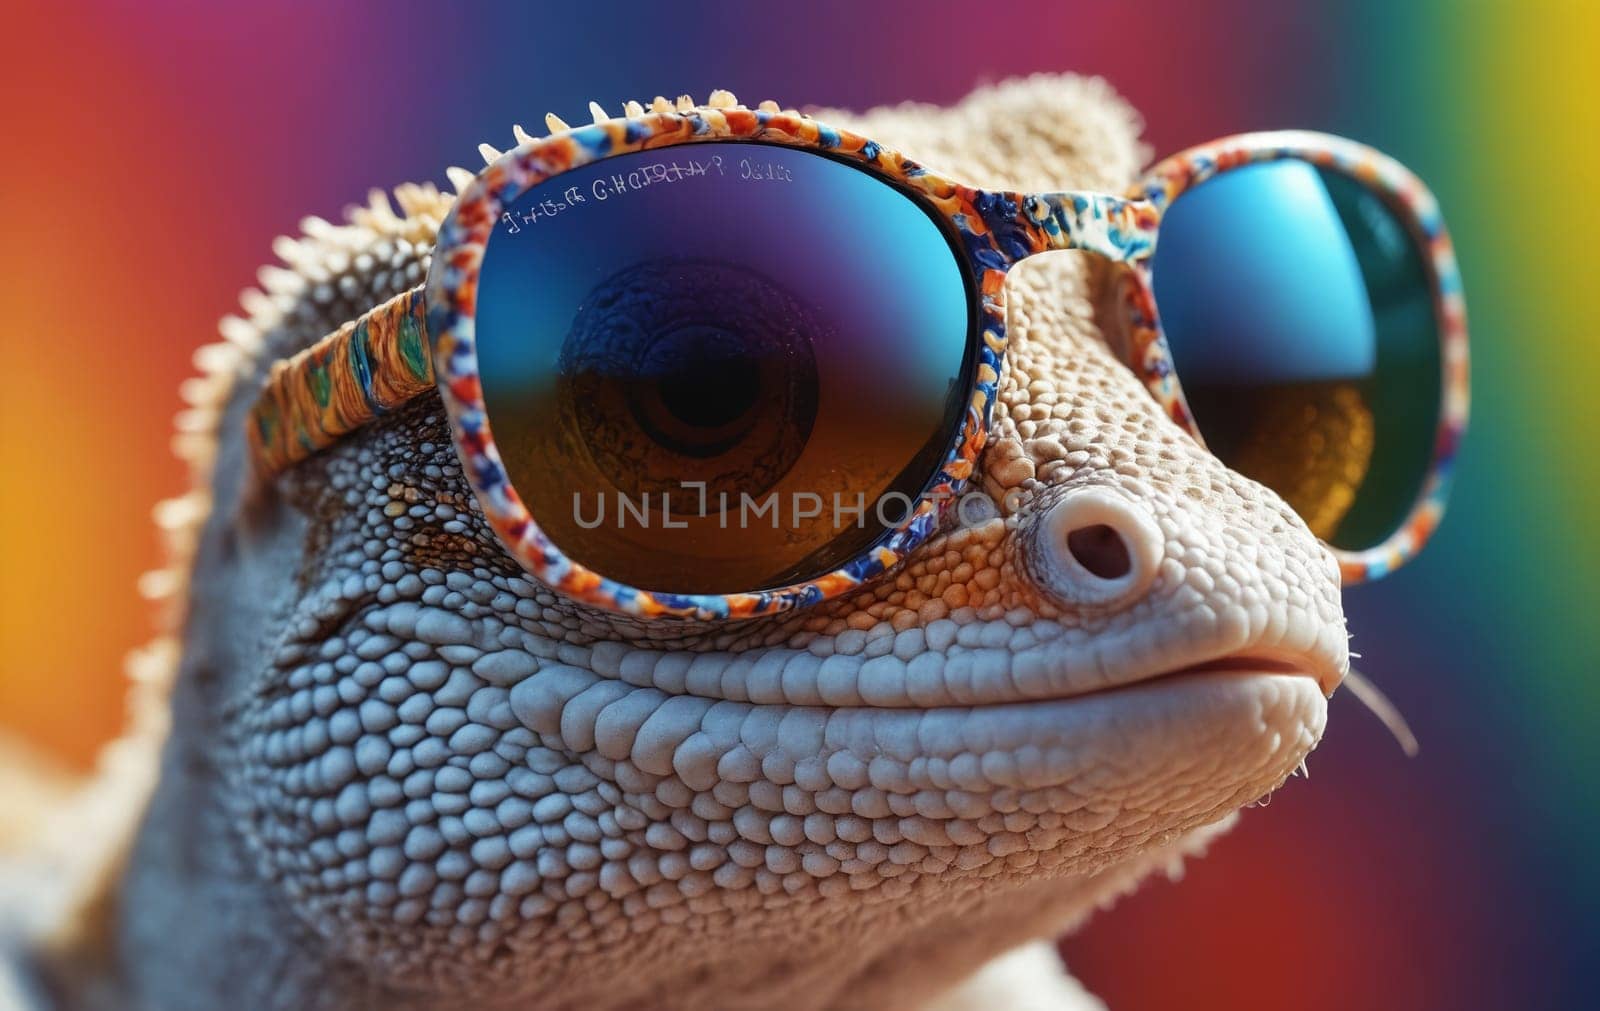 A closeup of a terrestrial animal, a scaled reptile, a lizard wearing electric blue sunglasses. A fun way to promote vision care and eyewear protection